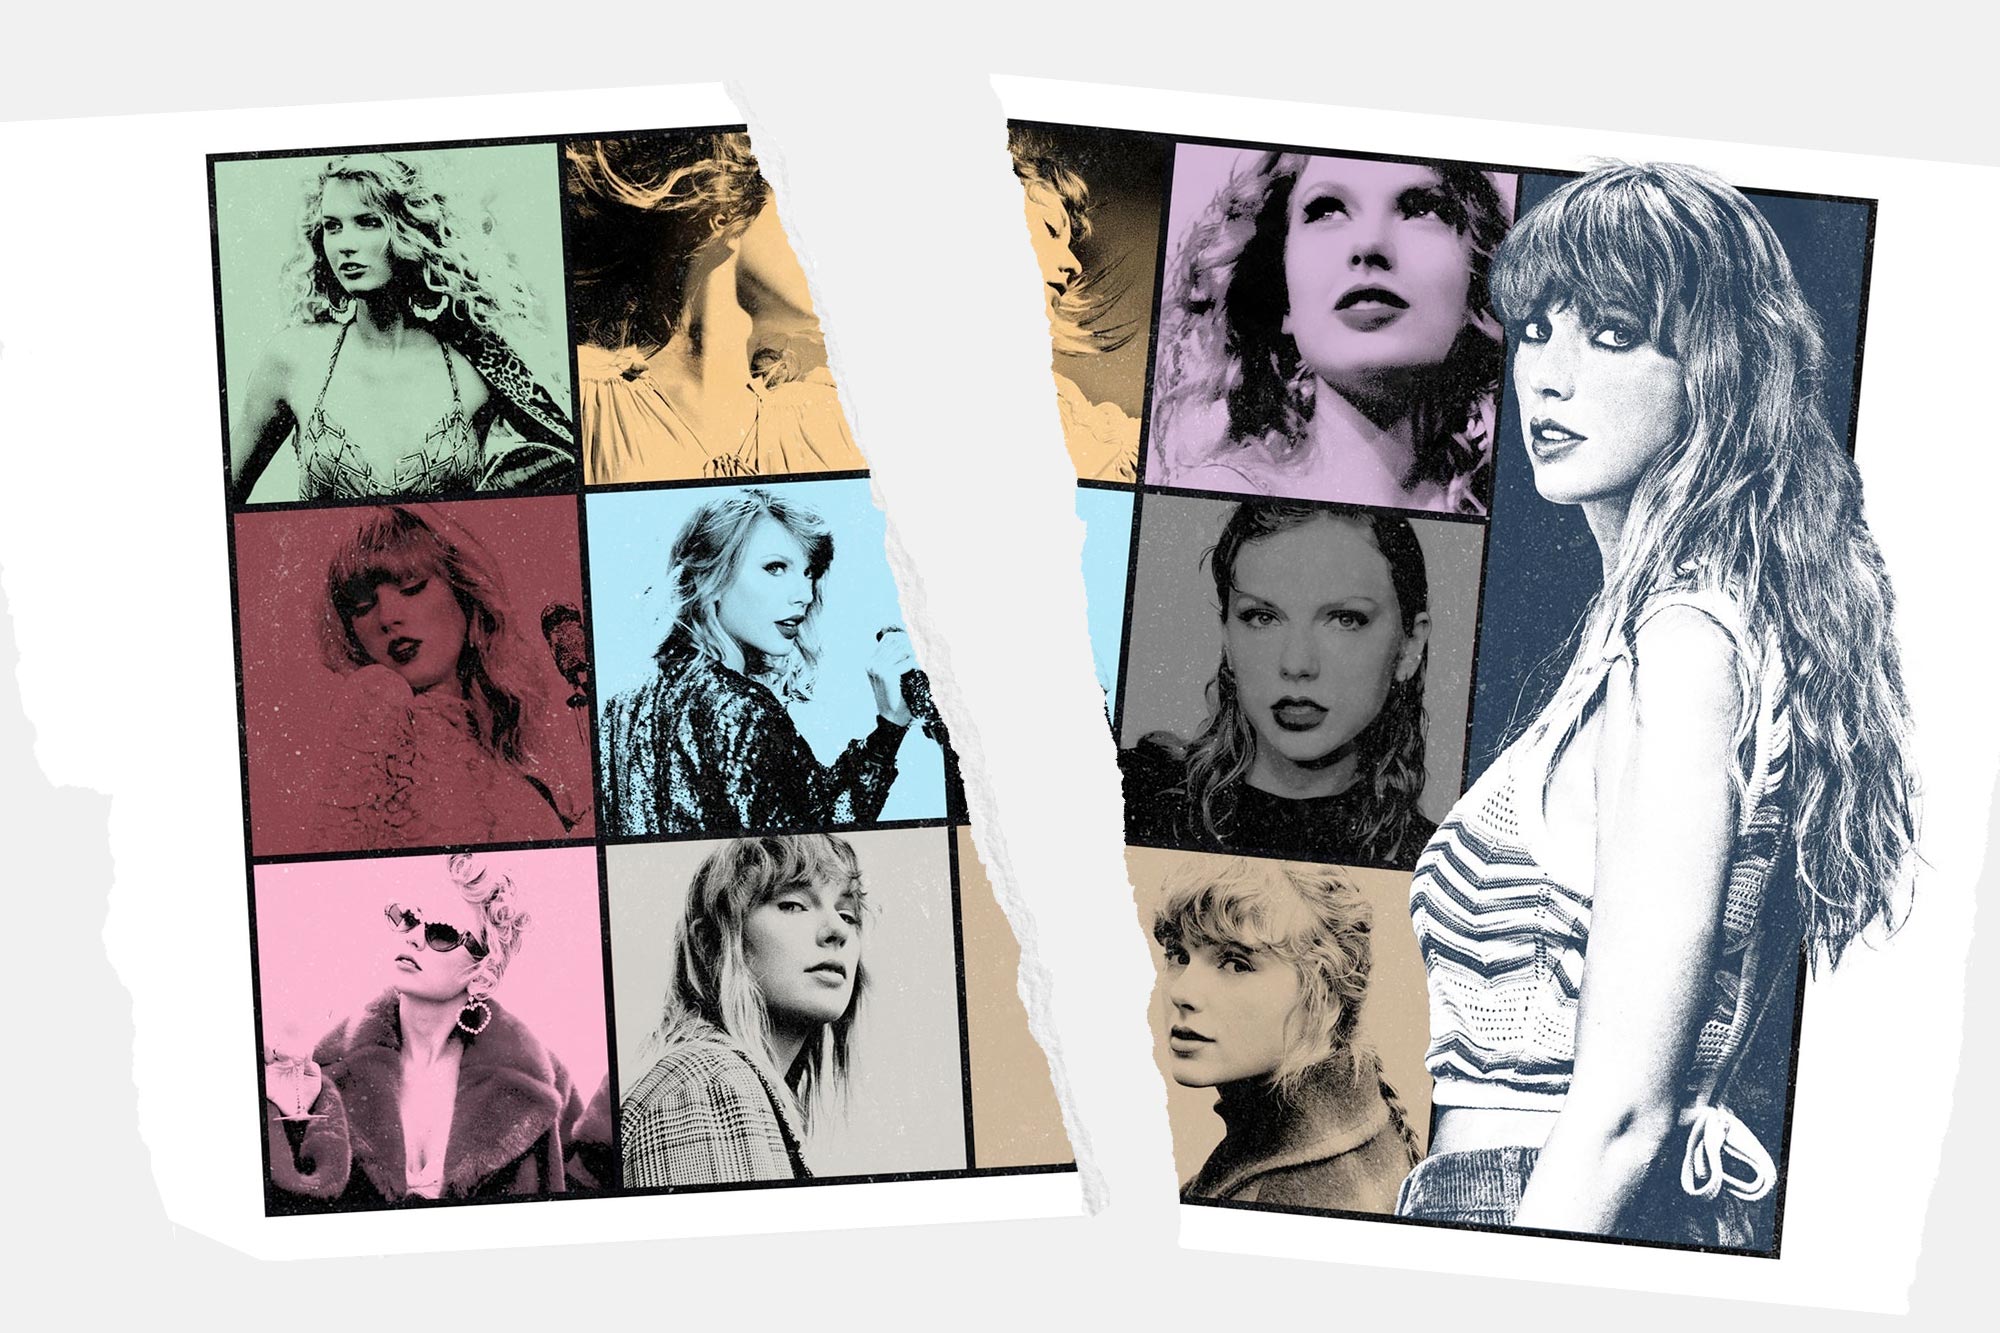 A colorful promotional image for Taylor Swift’s Eras tour shows the artist in a variety of different looks from over the years. Down the center, the image appears to be ripped violently in half.